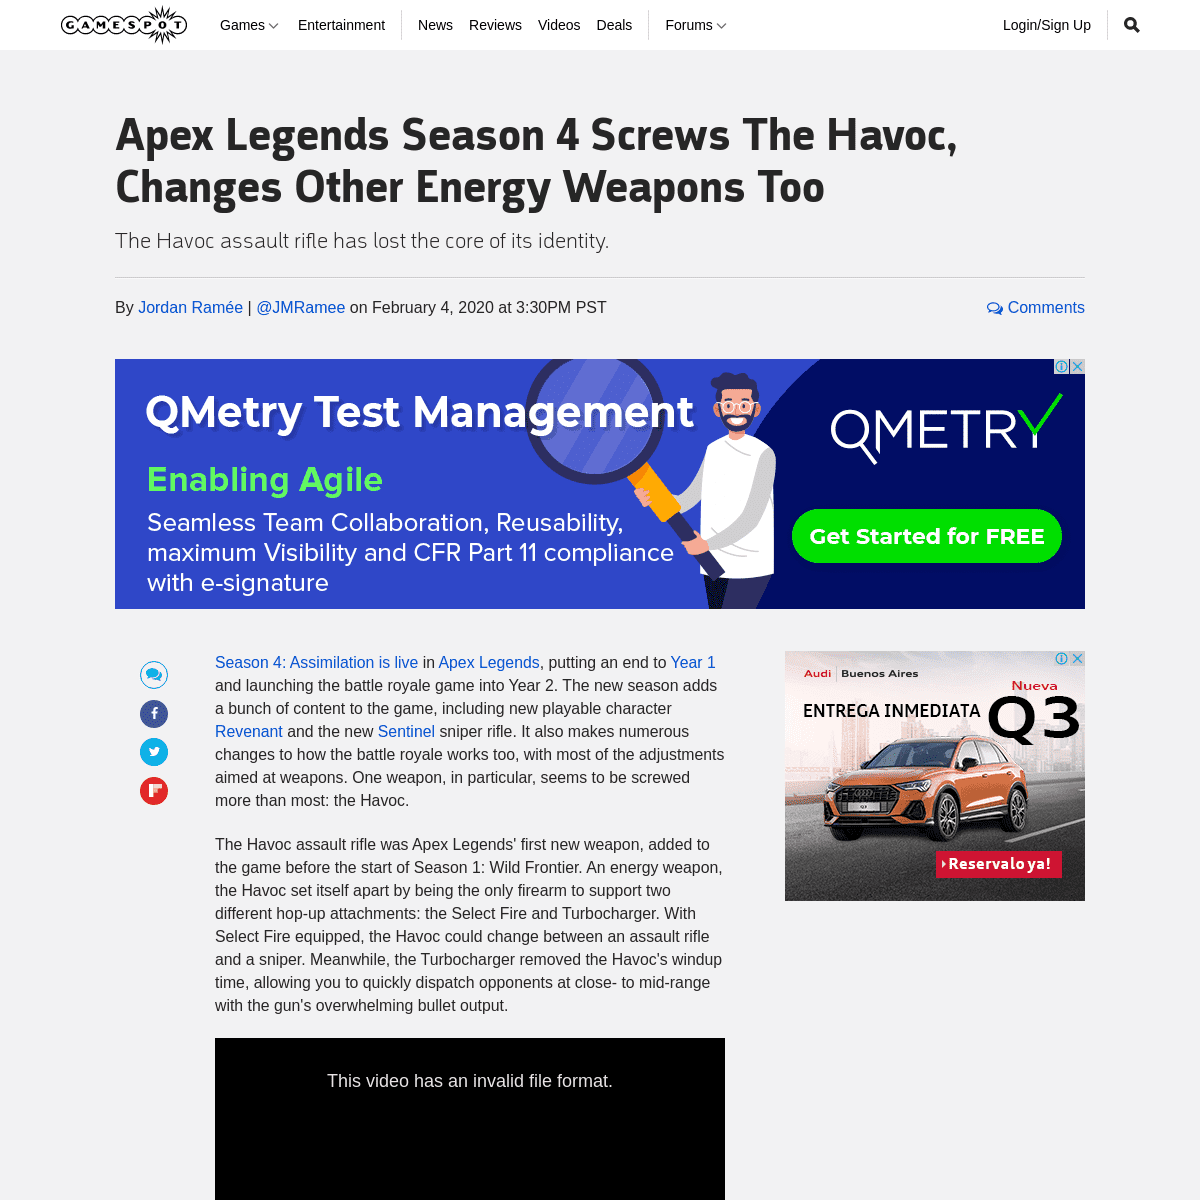 A complete backup of www.gamespot.com/articles/apex-legends-season-4-screws-the-havoc-changes-oth/1100-6473387/